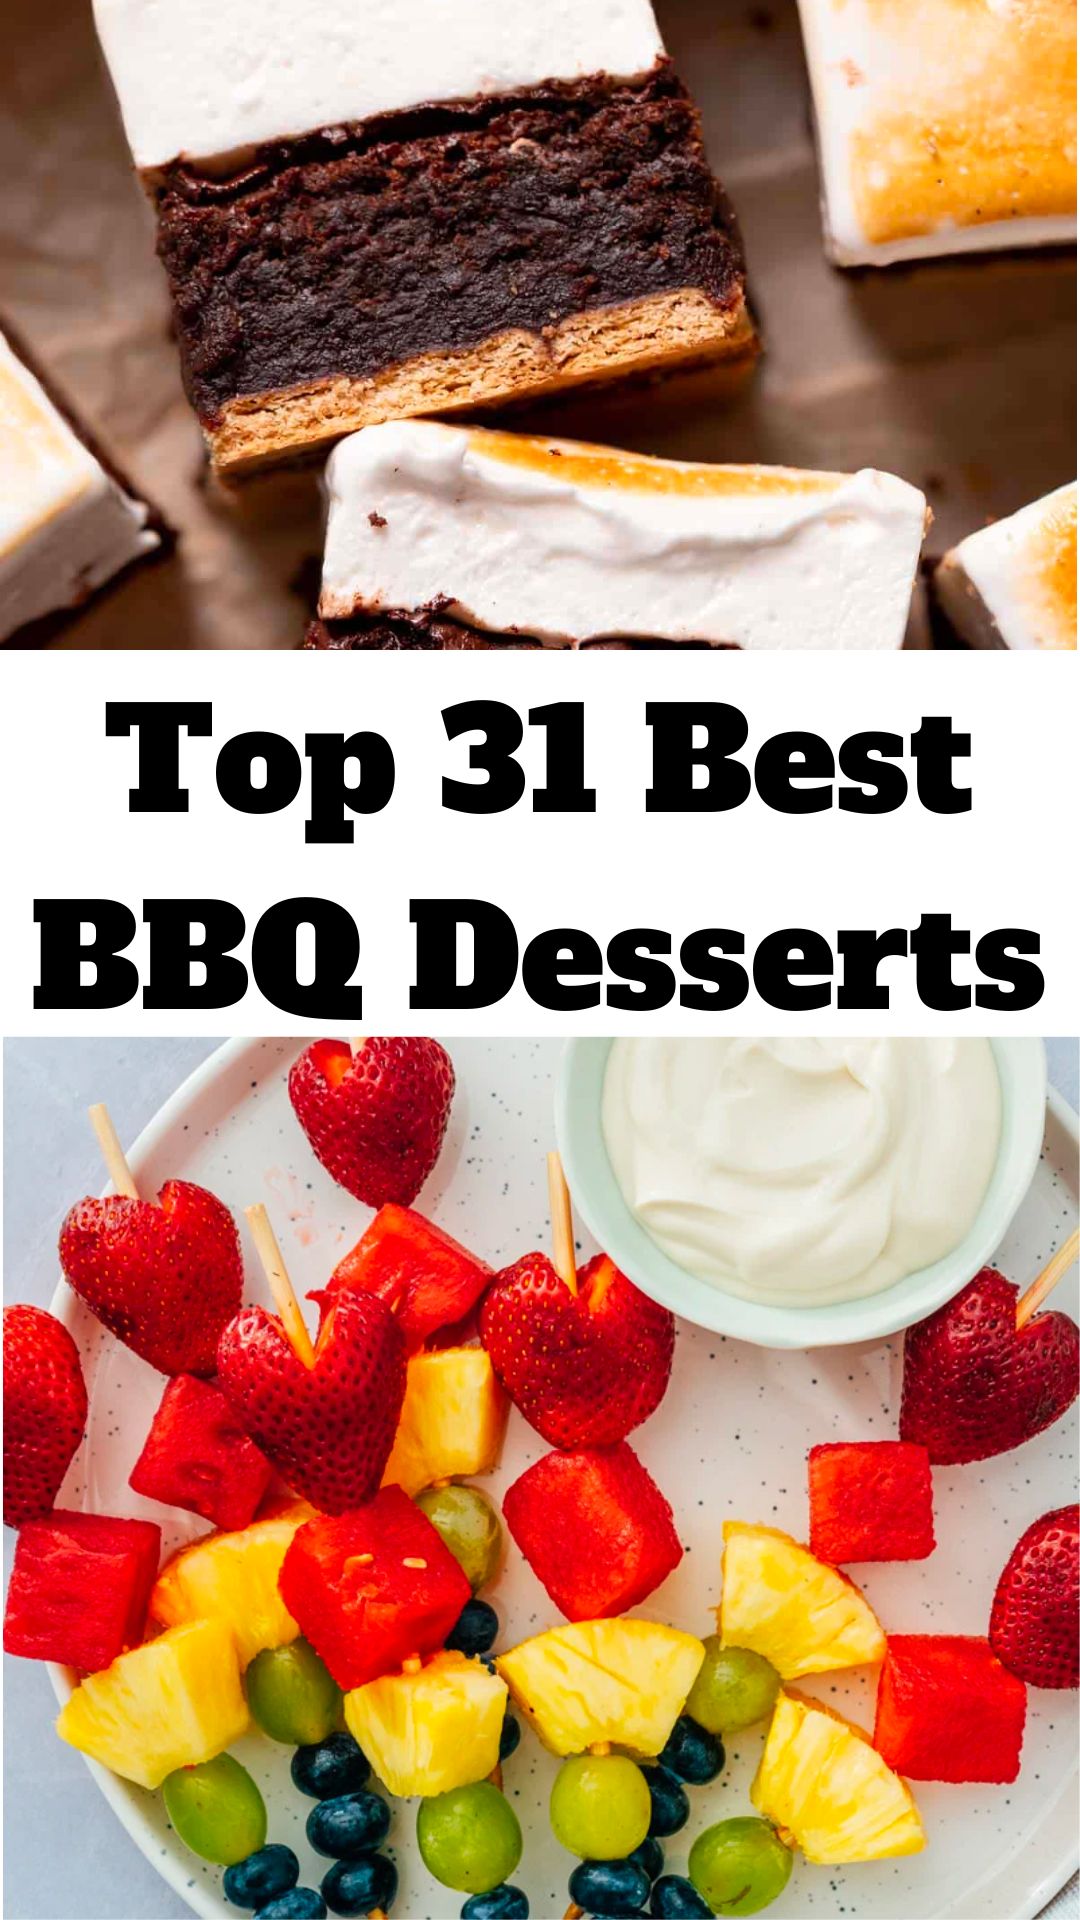 Desserts to Bring to a BBQ